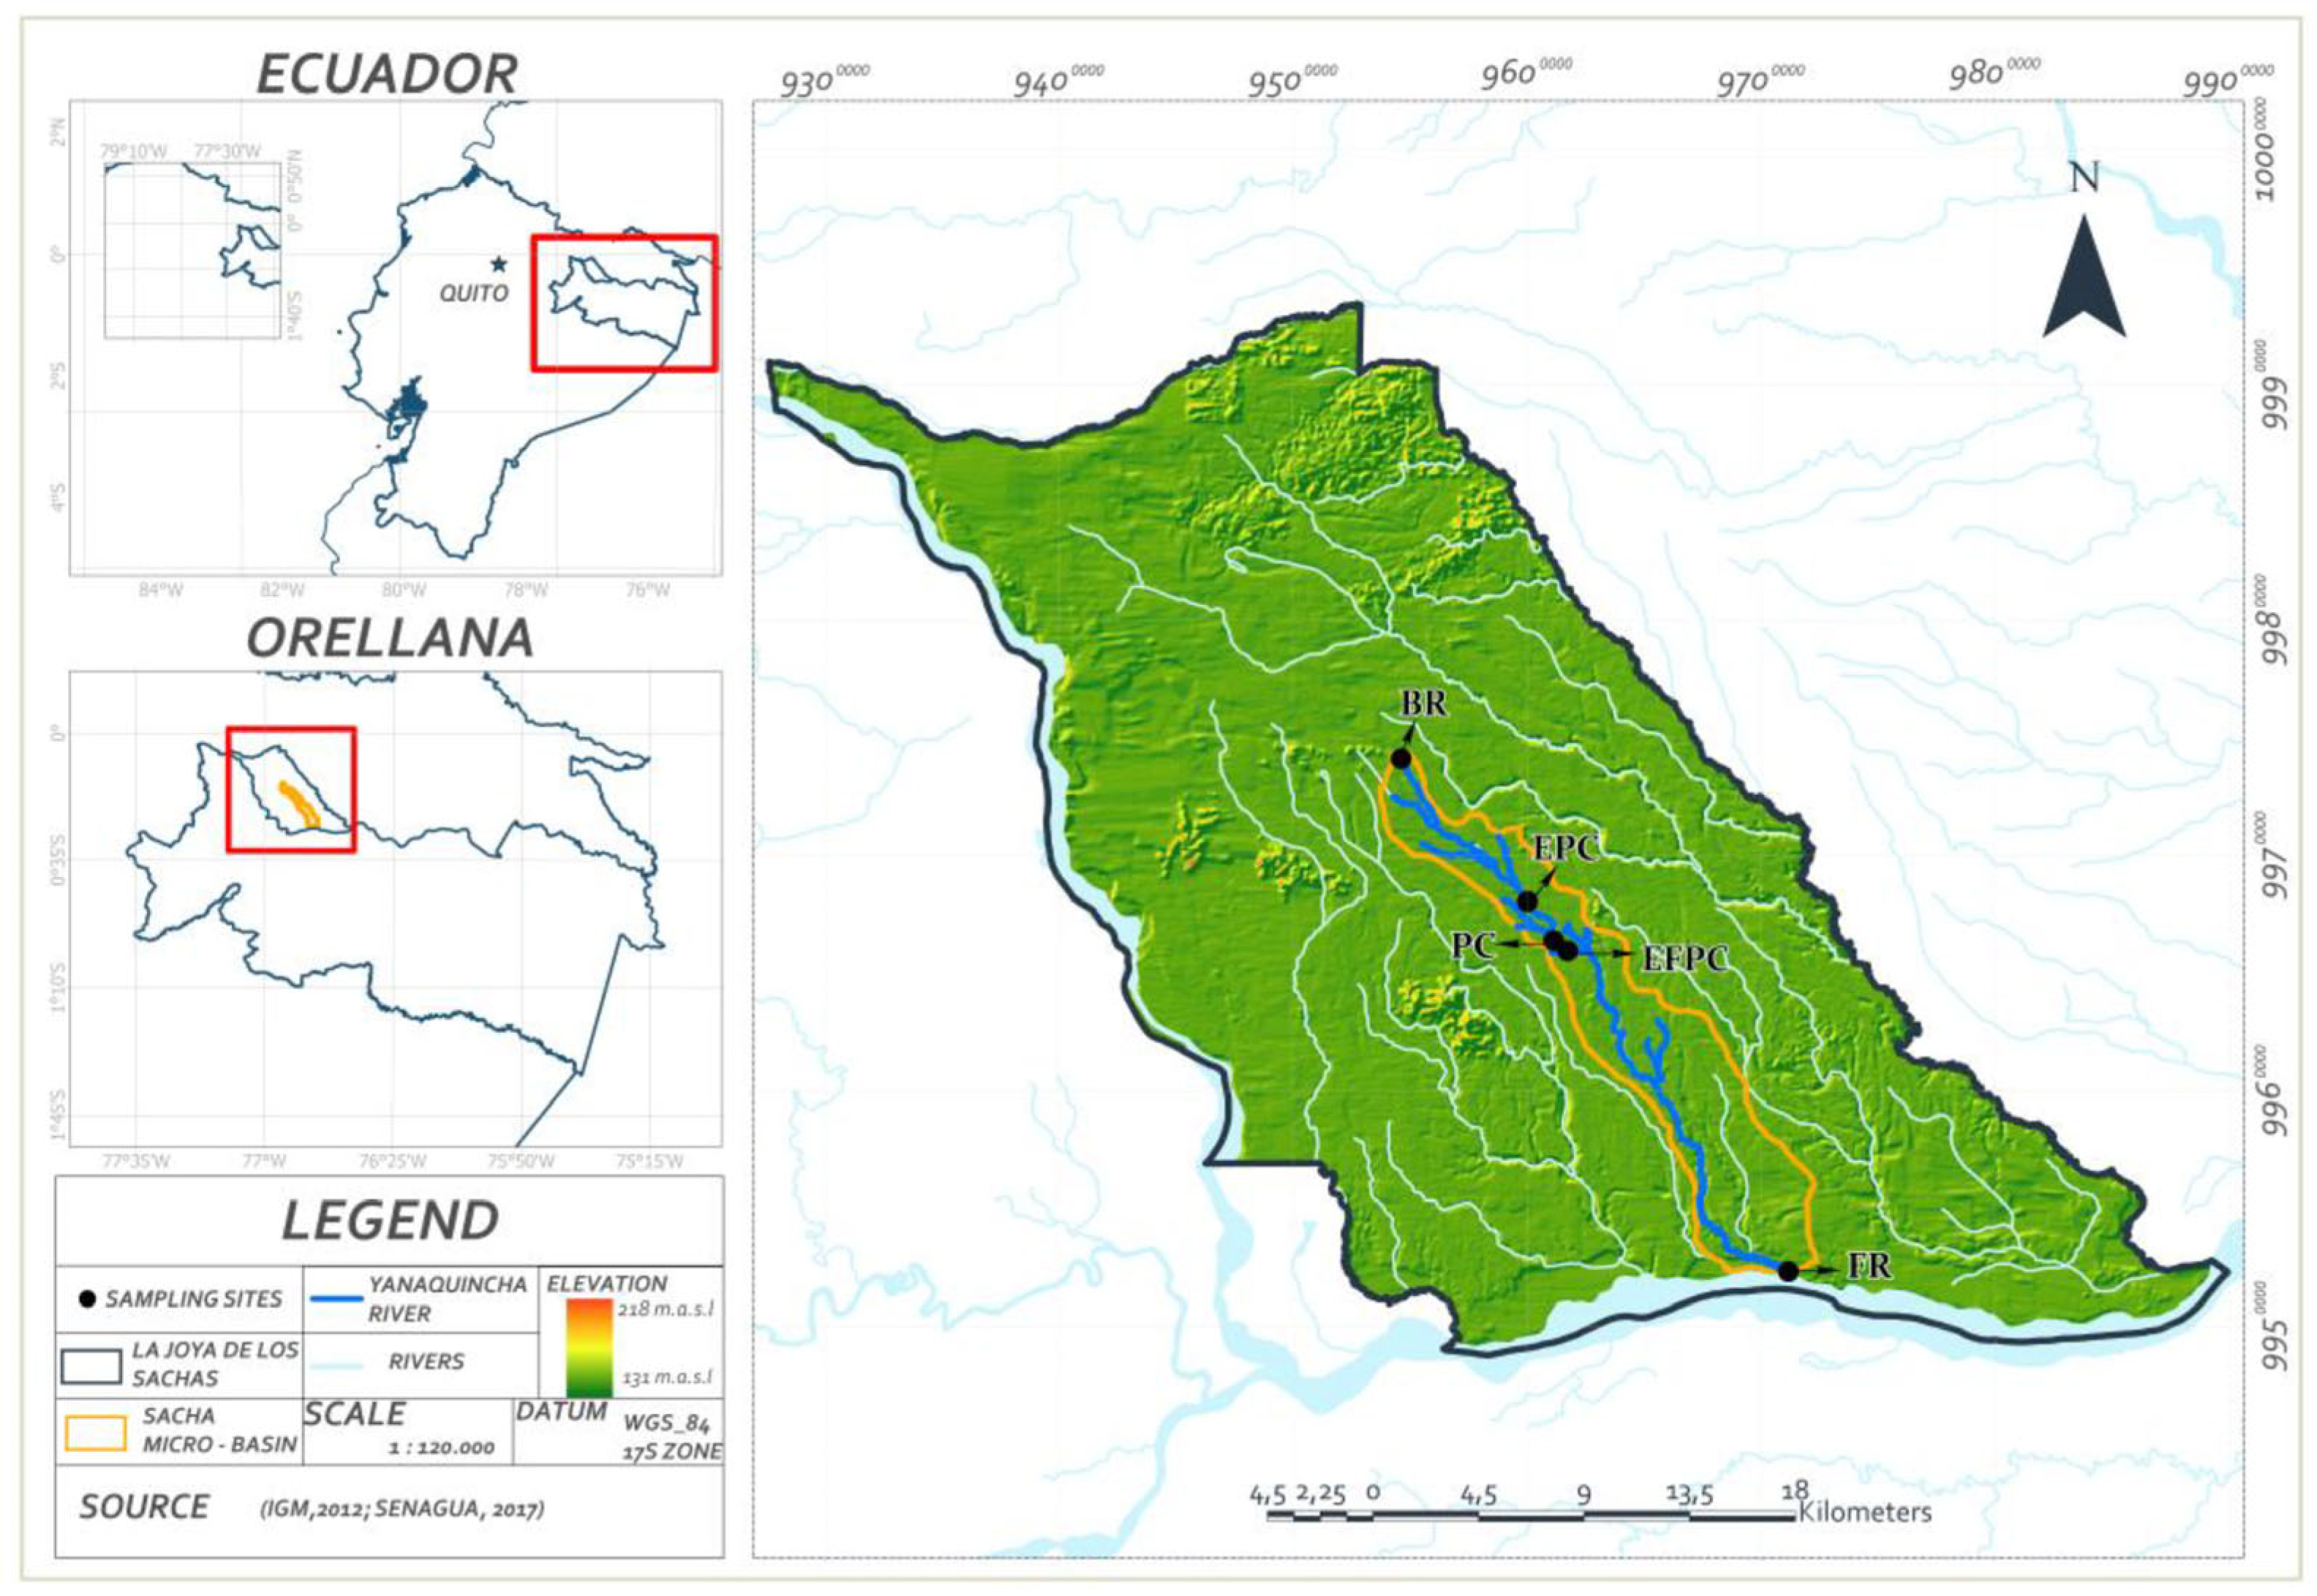 Sustainability | Free Full-Text | Ecological River Water Quality Based on  Macroinvertebrates Present in the Ecuadorian Amazon